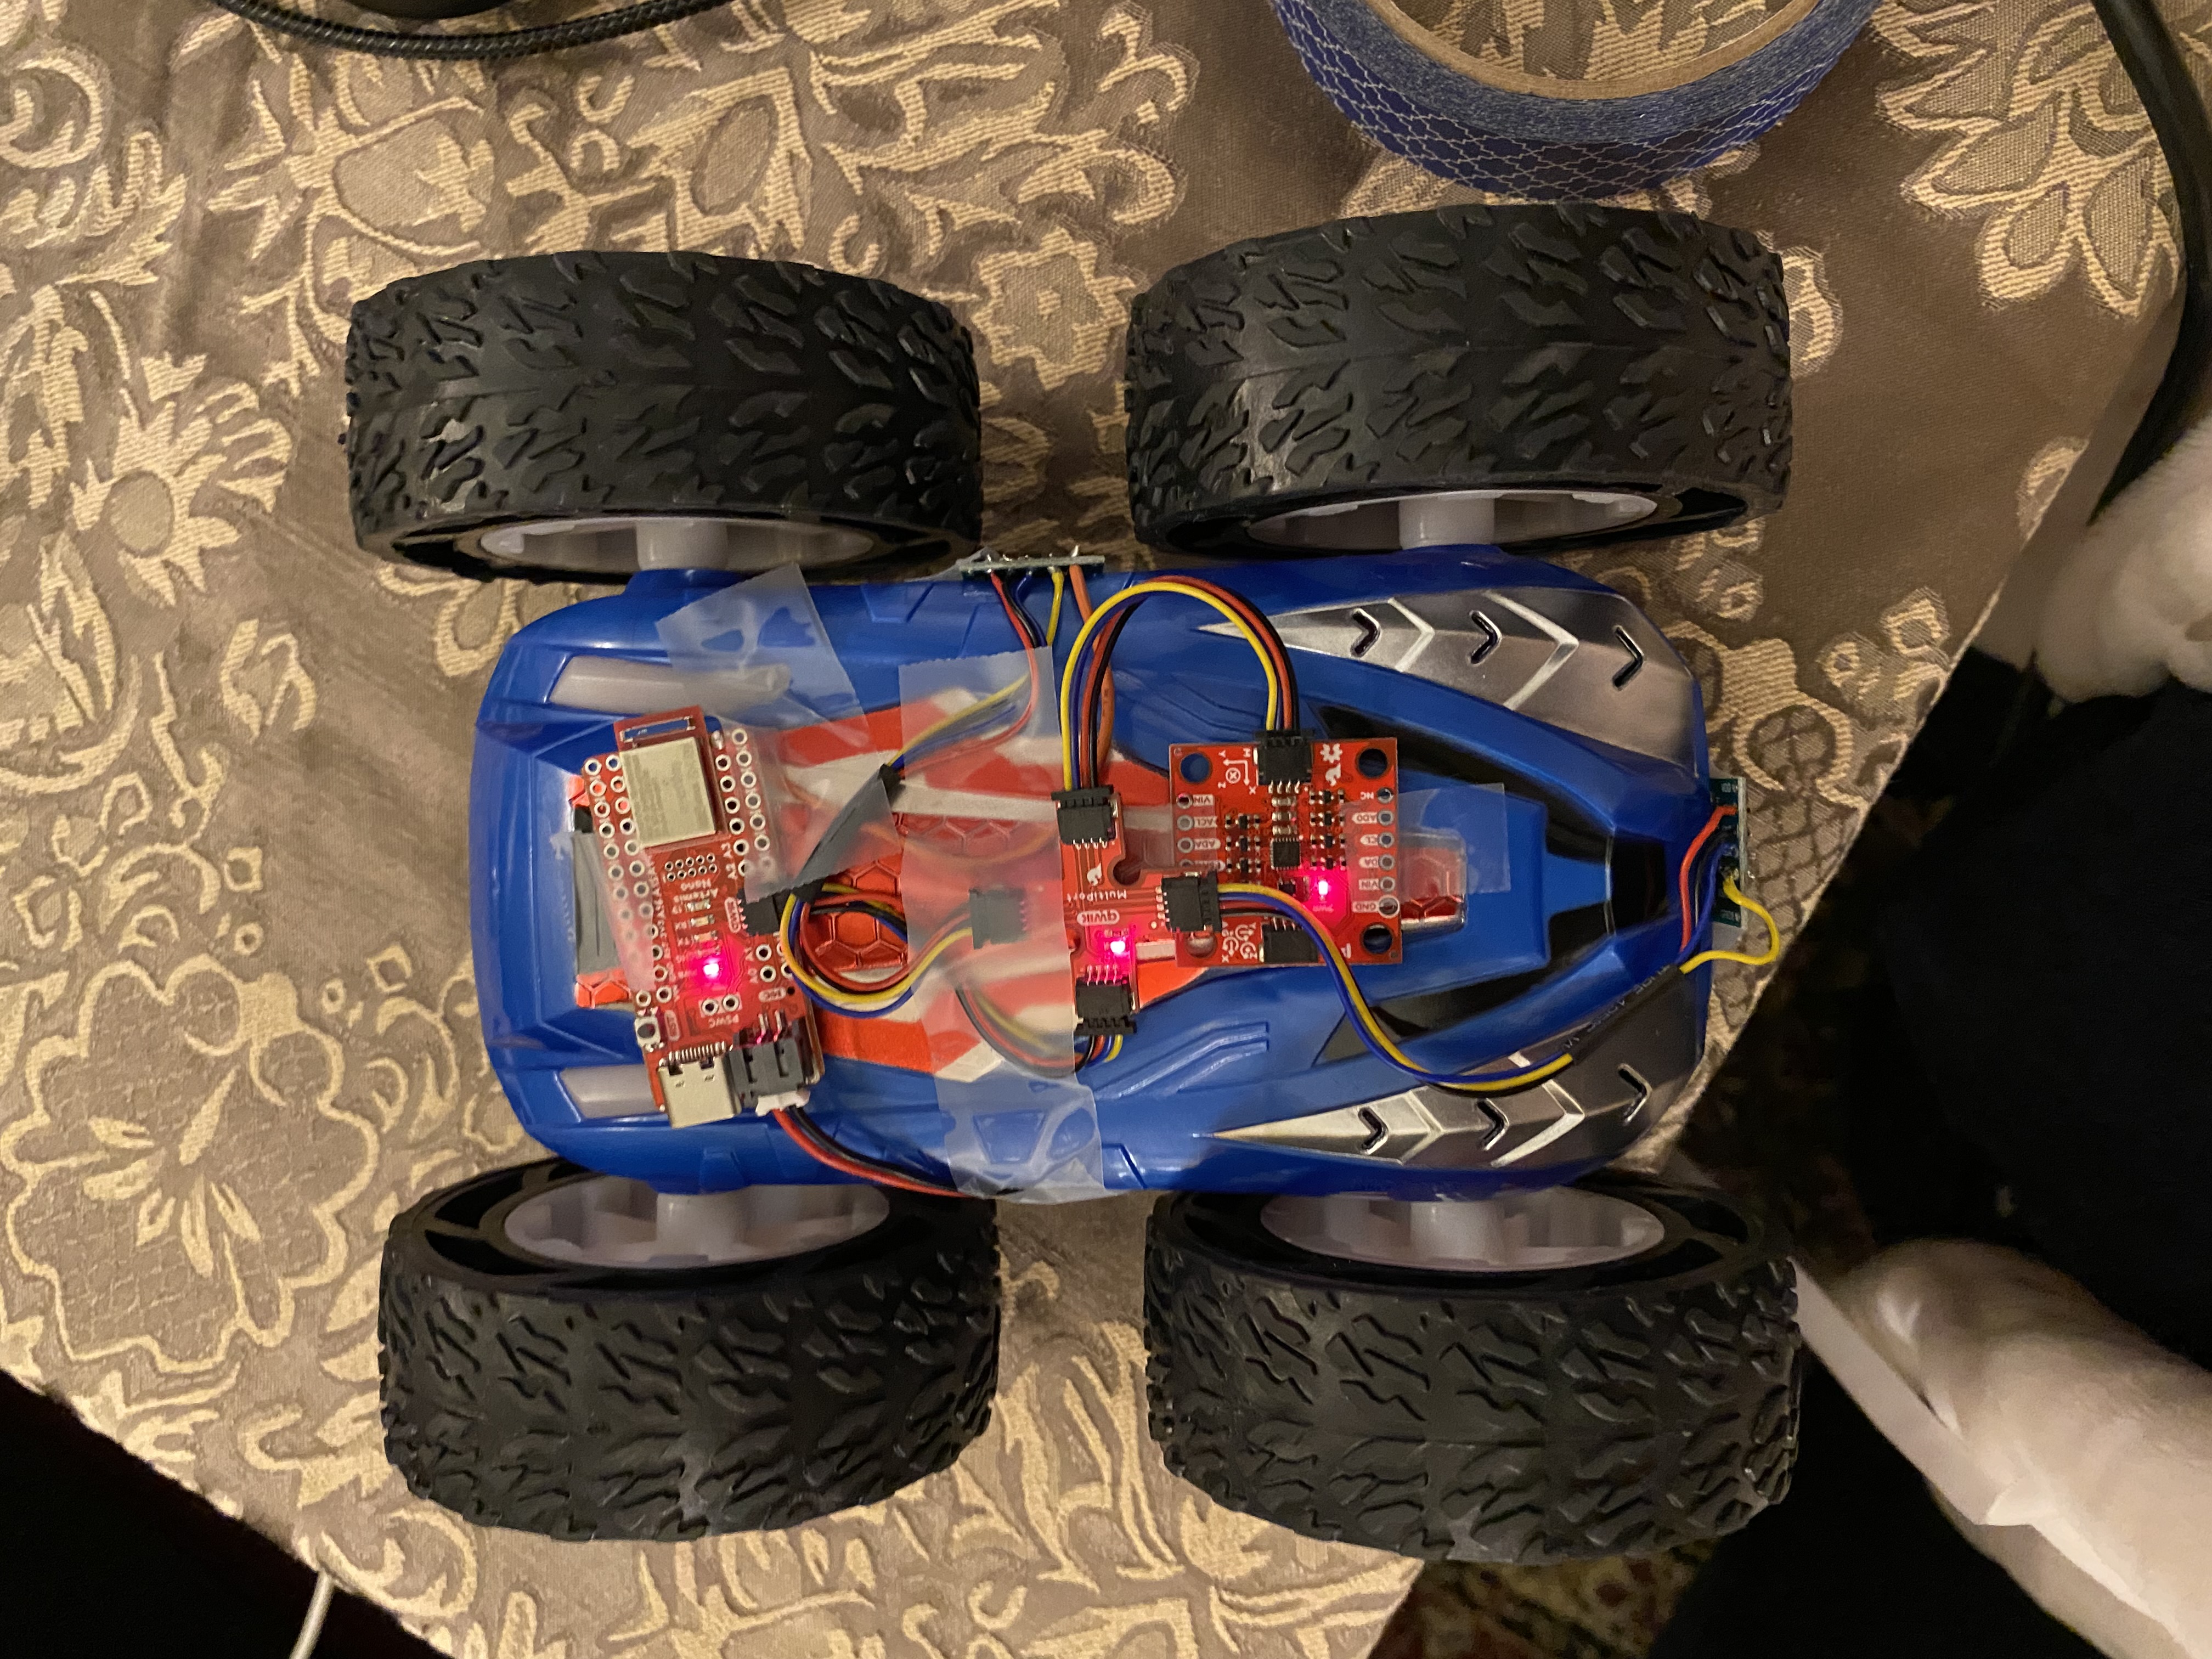 artemis with sensors attached to RC car